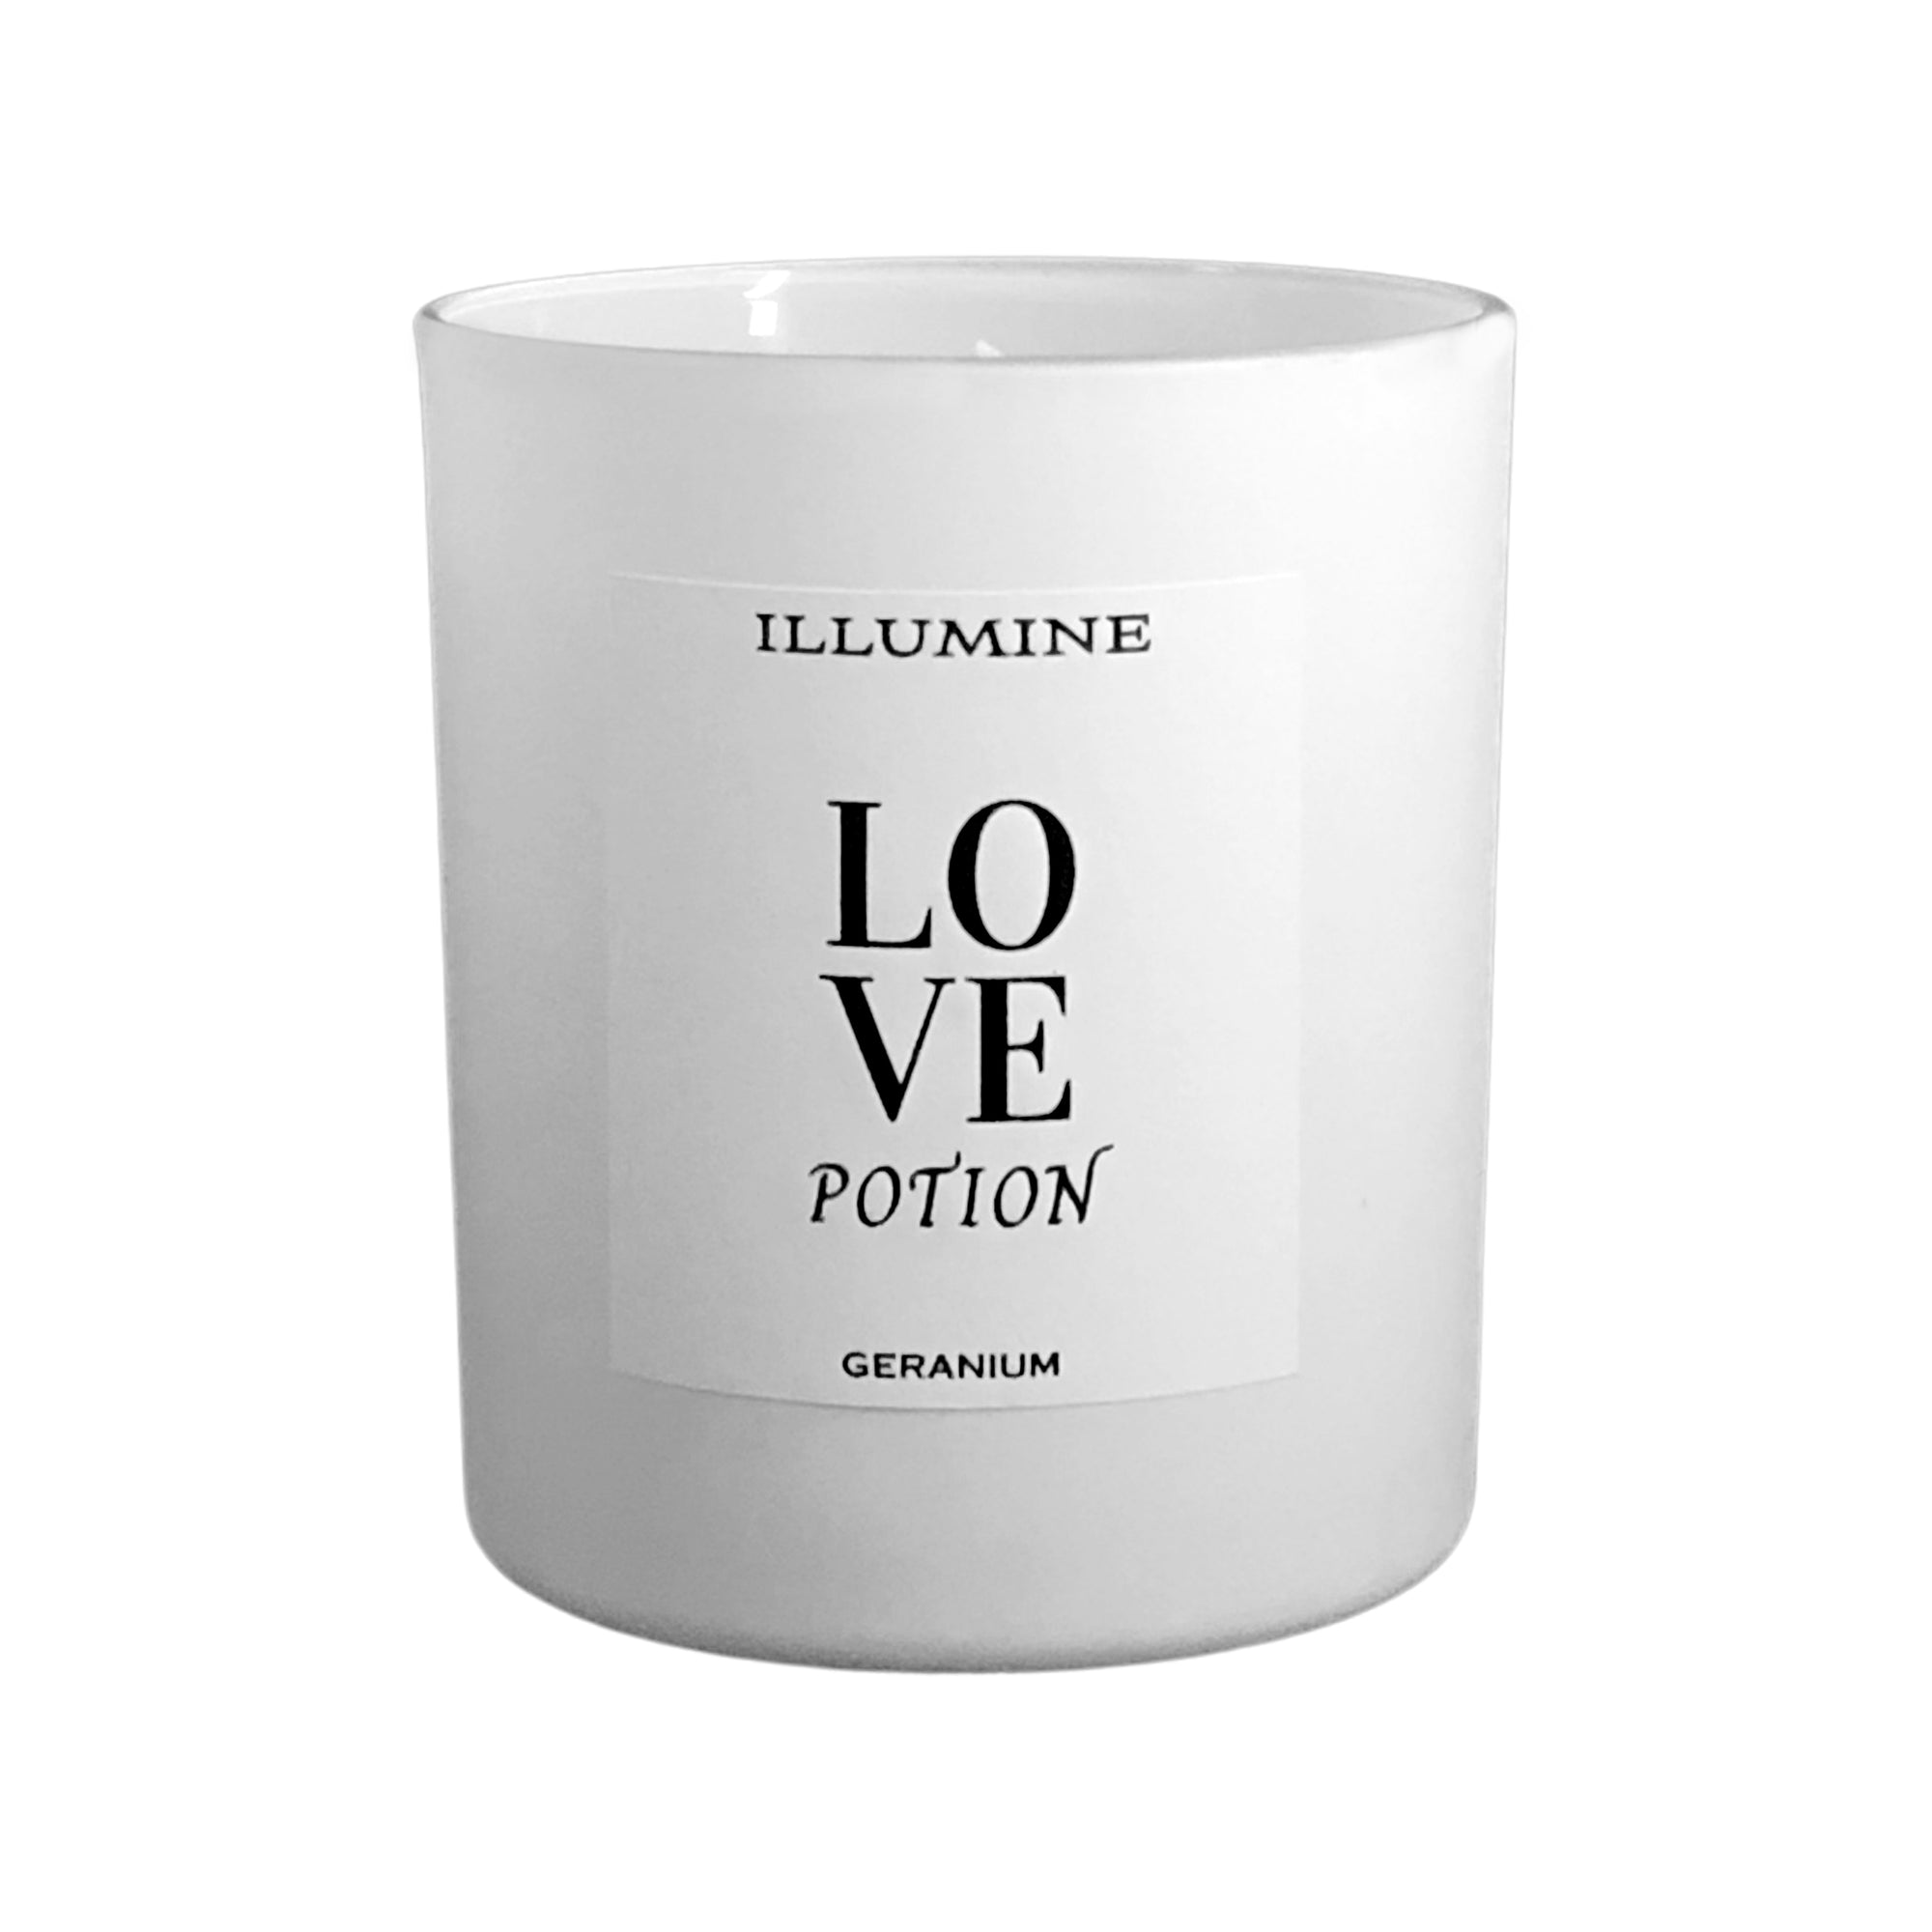 Illumine Love Potion Superpower Candle